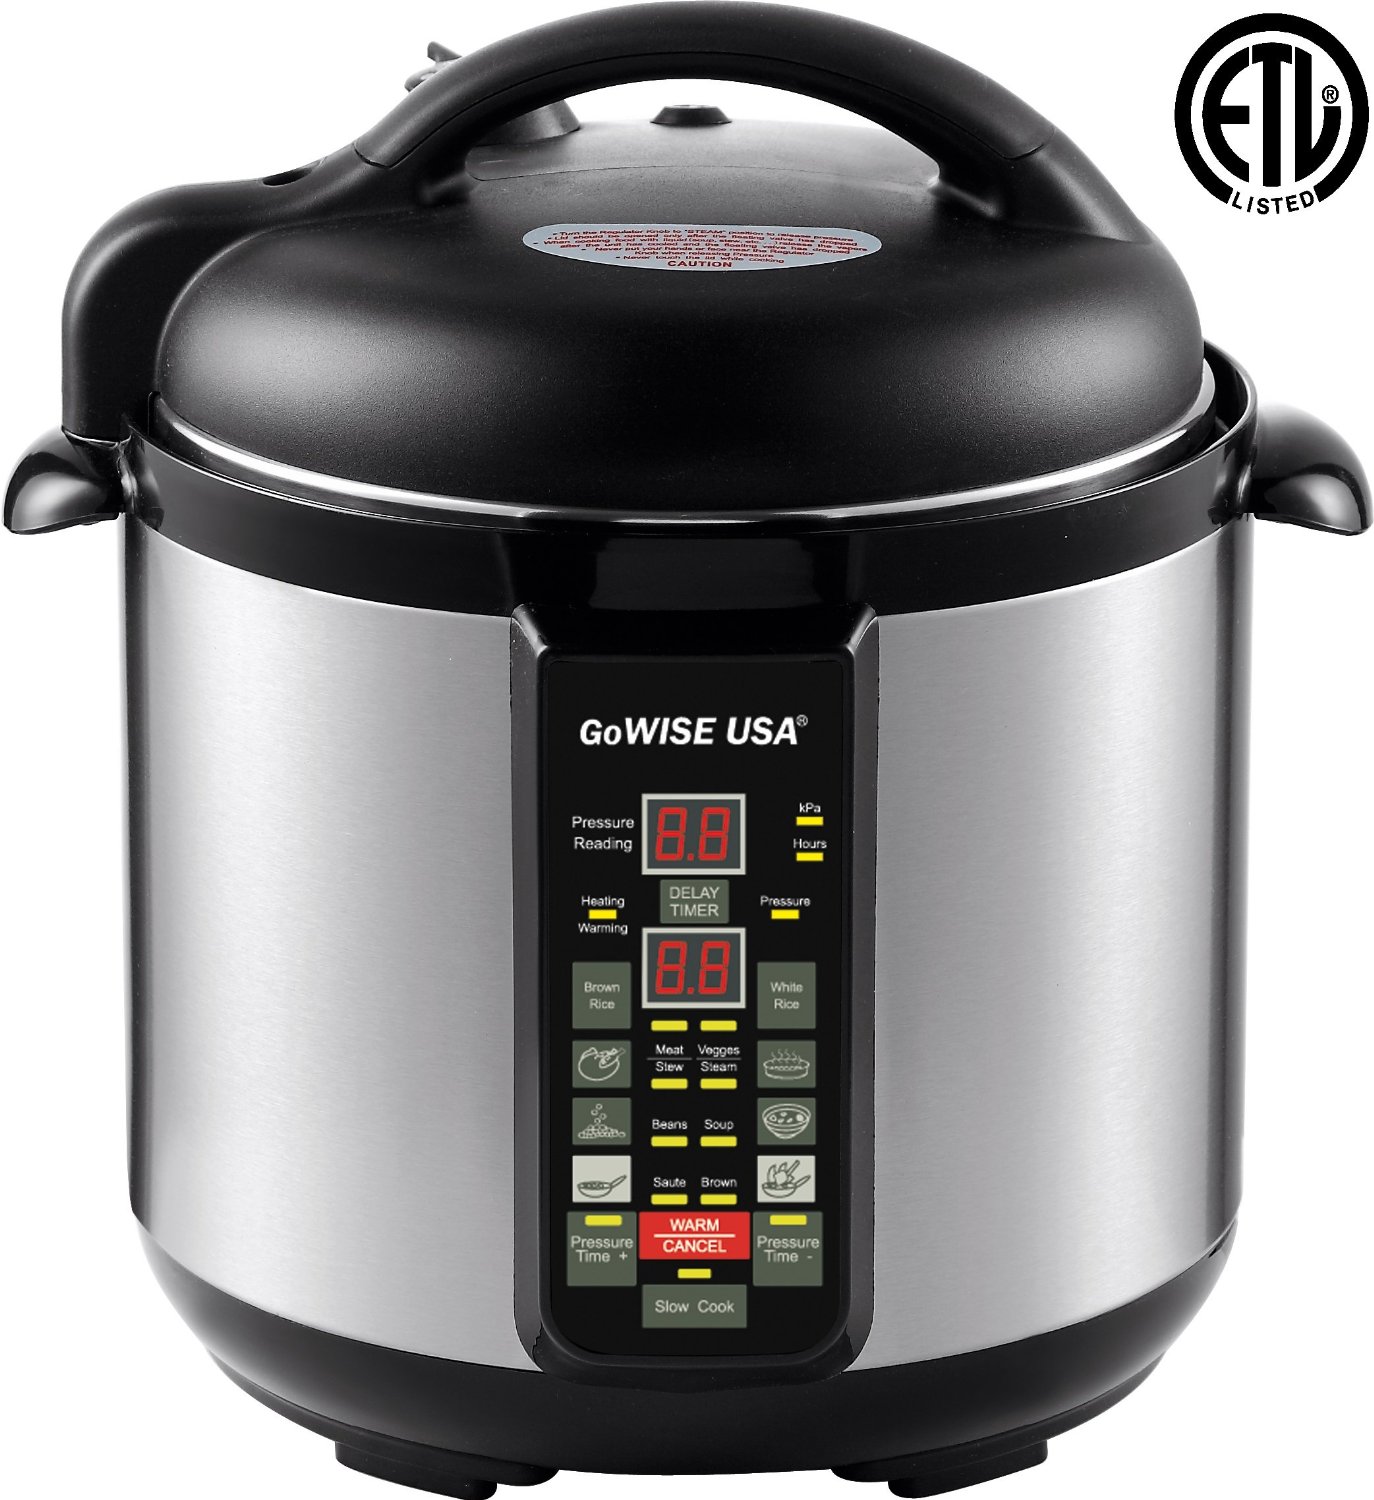 Gowise usa pressure cooker